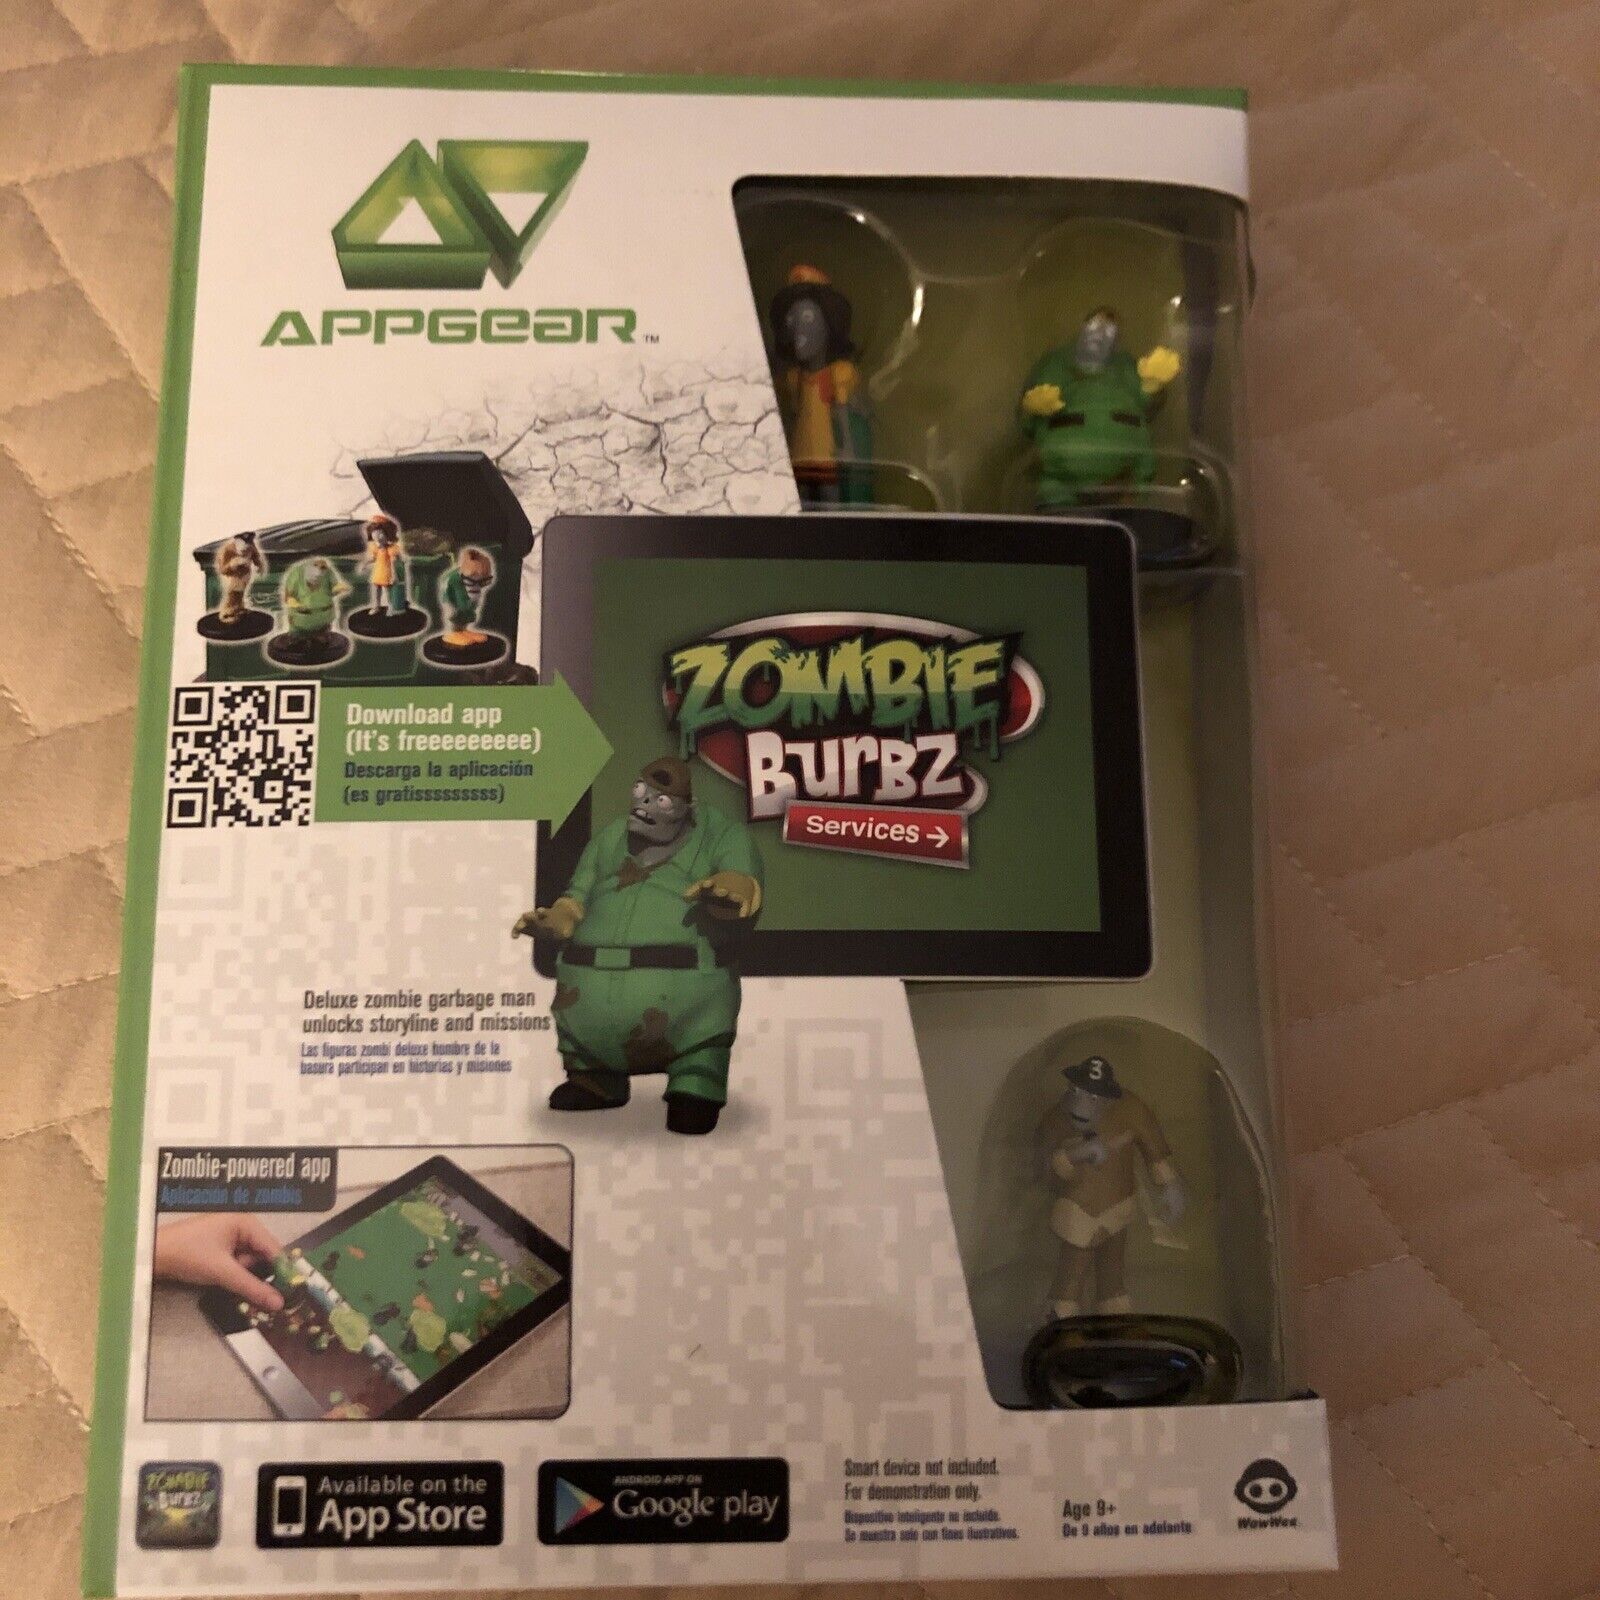 NEW 2011 APPGEAR Zombie Burbz Services Amplified Reality Game iOS iPad Android